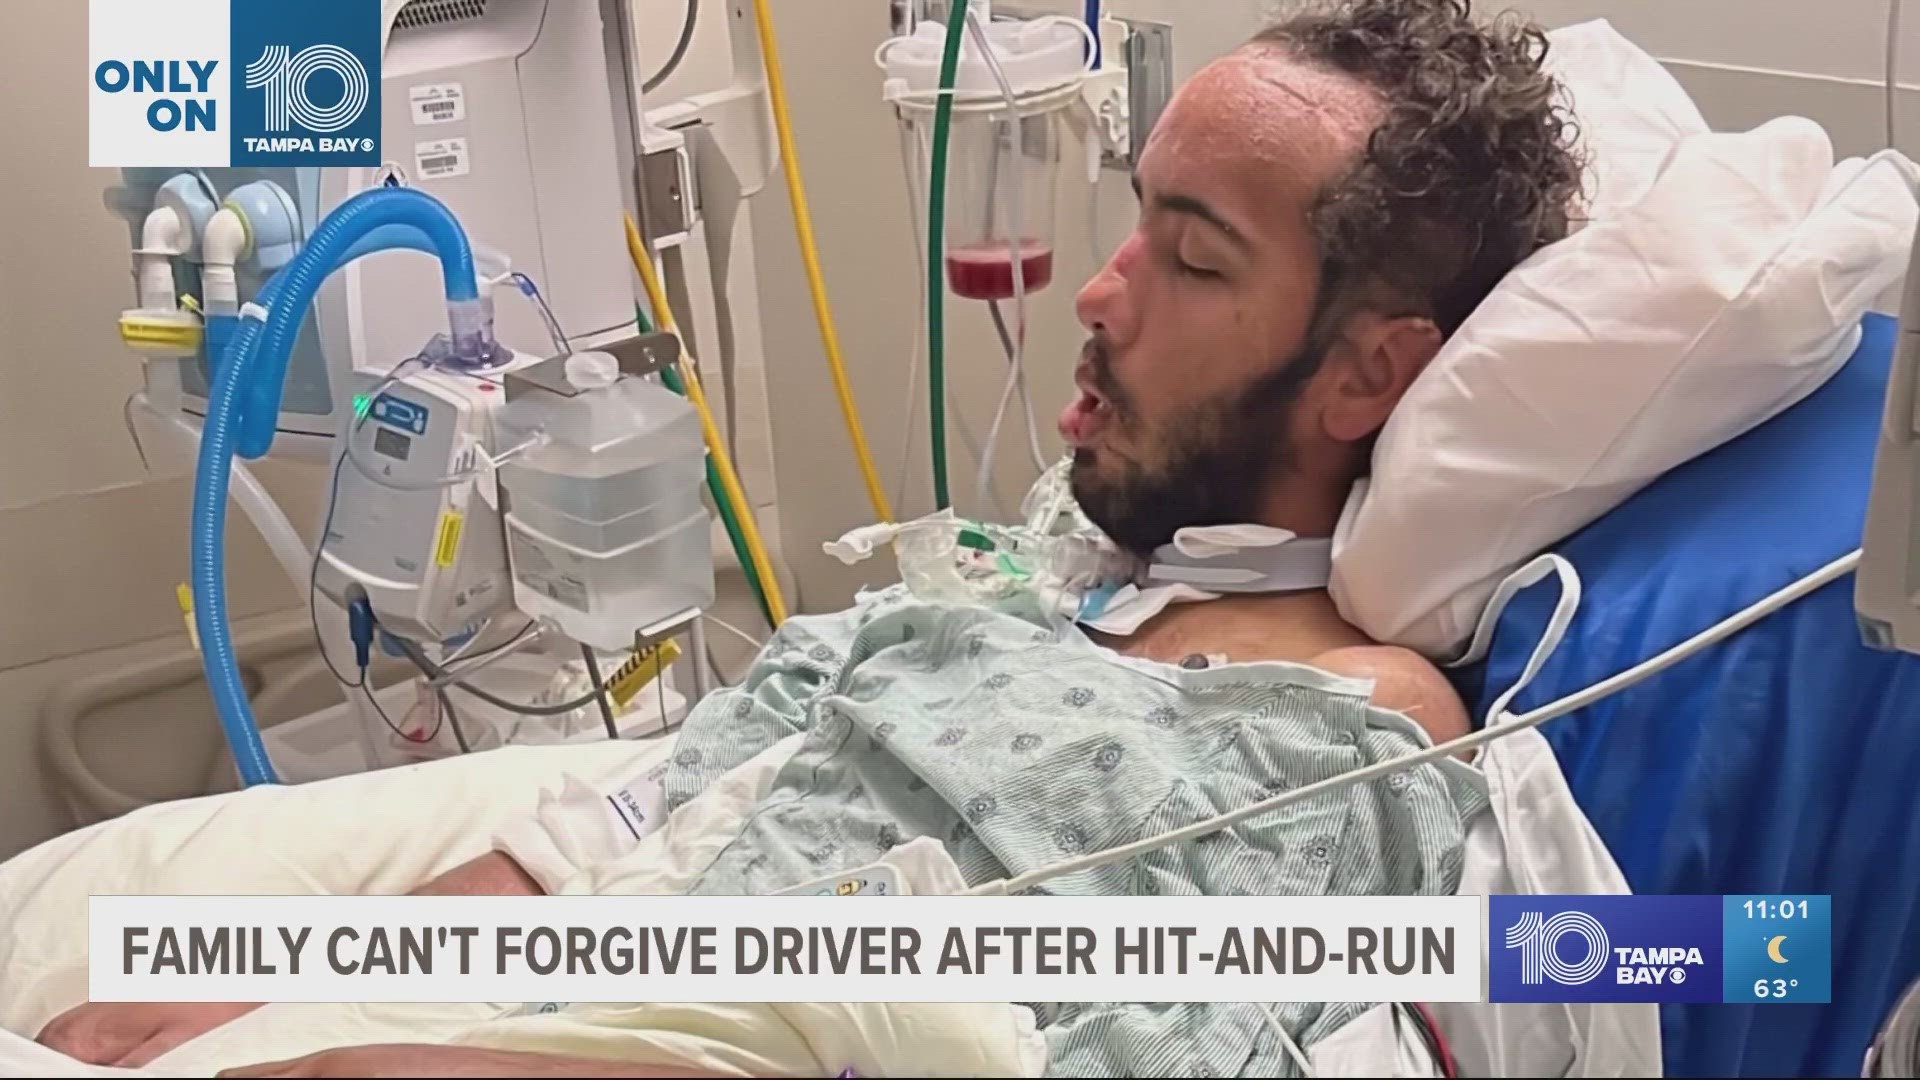 The hit-and-run happened near State Road 544 in Winter Haven while he was riding home on his electric scooter.